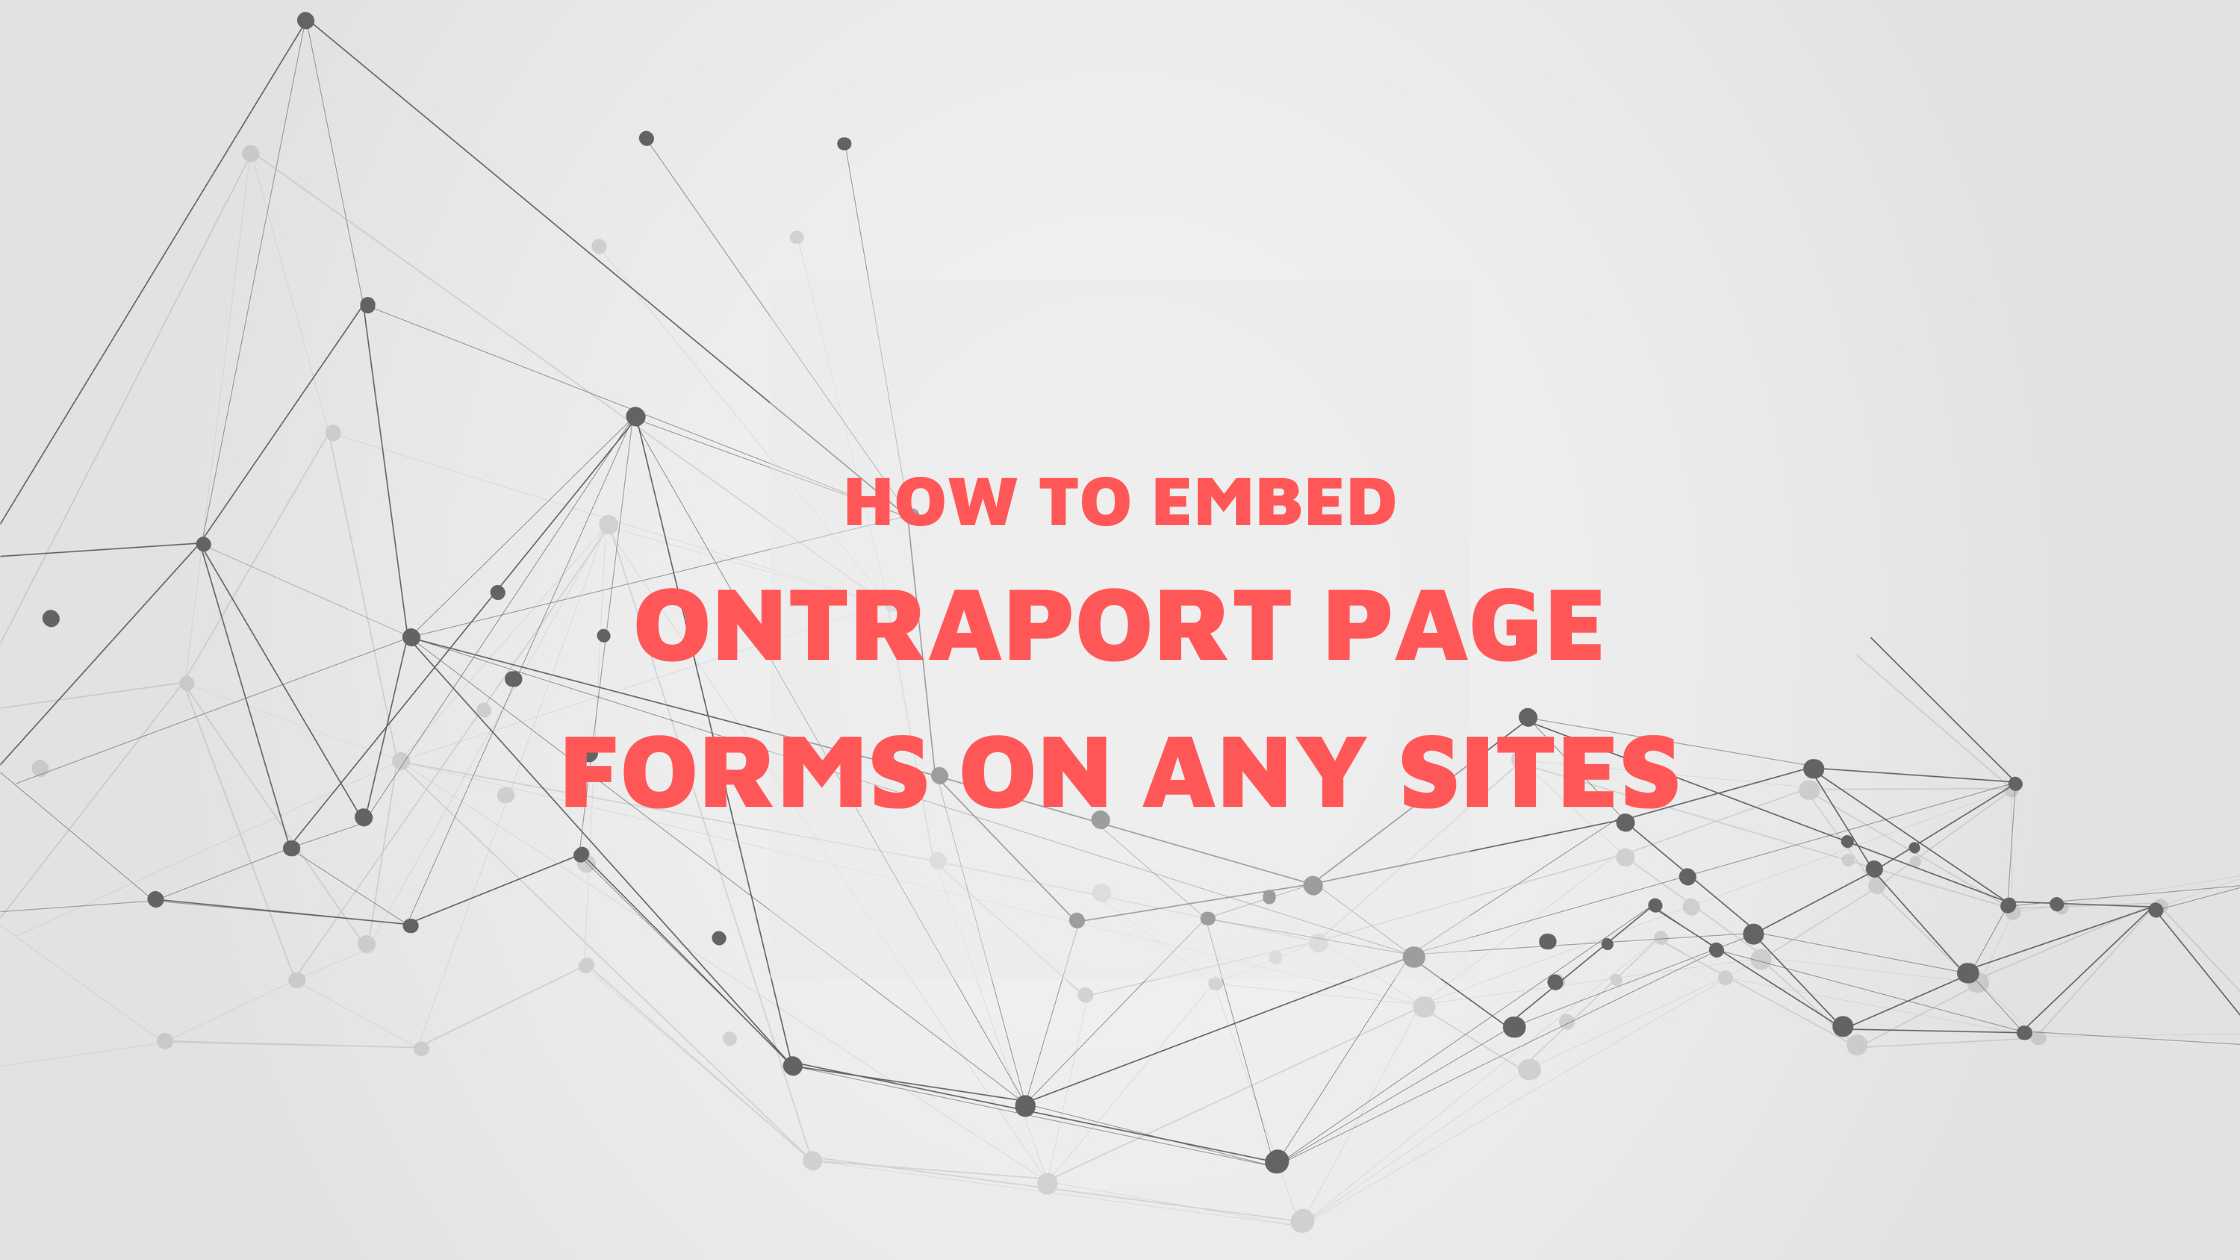 How to Embed Ontraport Page Forms on any sites